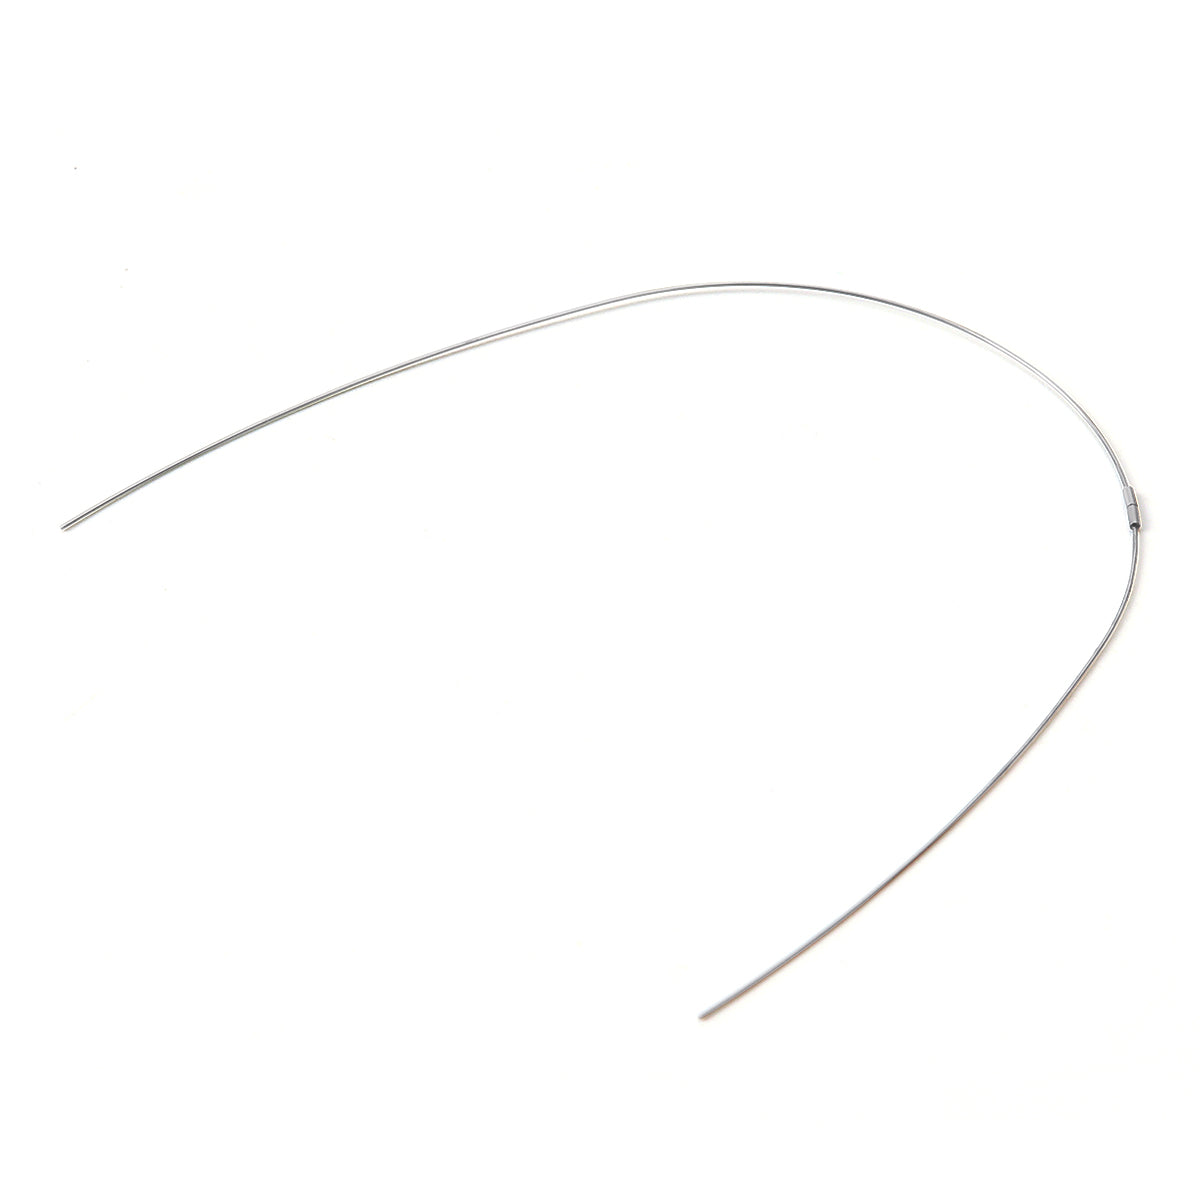 AZDENT Dental Copper Cu-NiTi Arch Wire Round 35˚ Super Elastic With Stops Preformed Full Sizes 1pcs/Pack